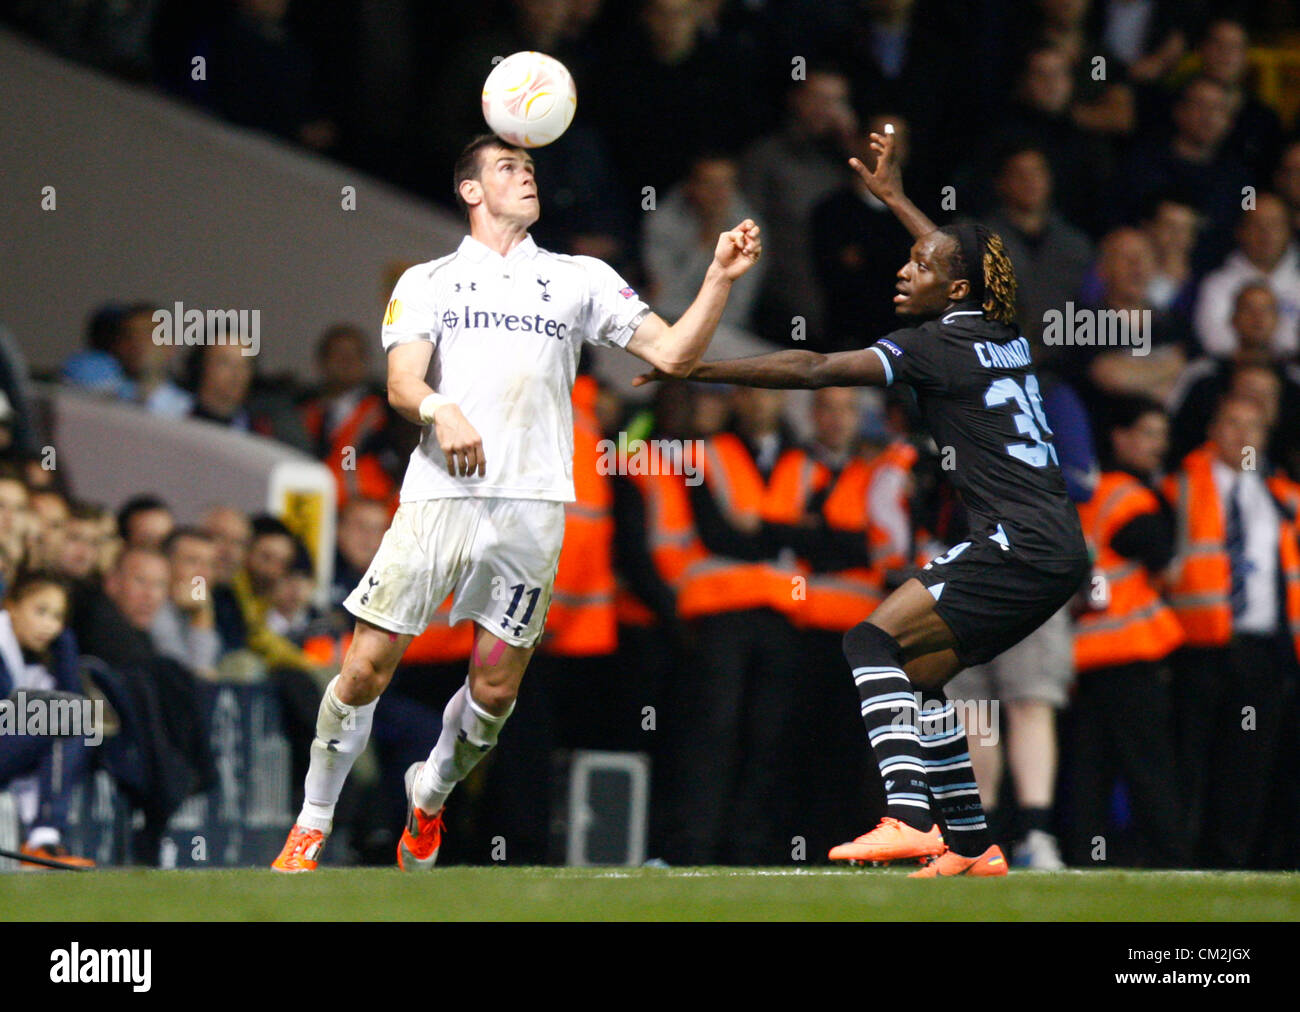 20.09.2012 London, ENGLAND:  Gareth Bale of Tottenham Hotspur and Luis Pedro Cavanda of S.S. Lazio in action during the Europa League Group J match between Tottenham Hotspur and SS Lazio at White Hart Lane Stadium Stock Photo